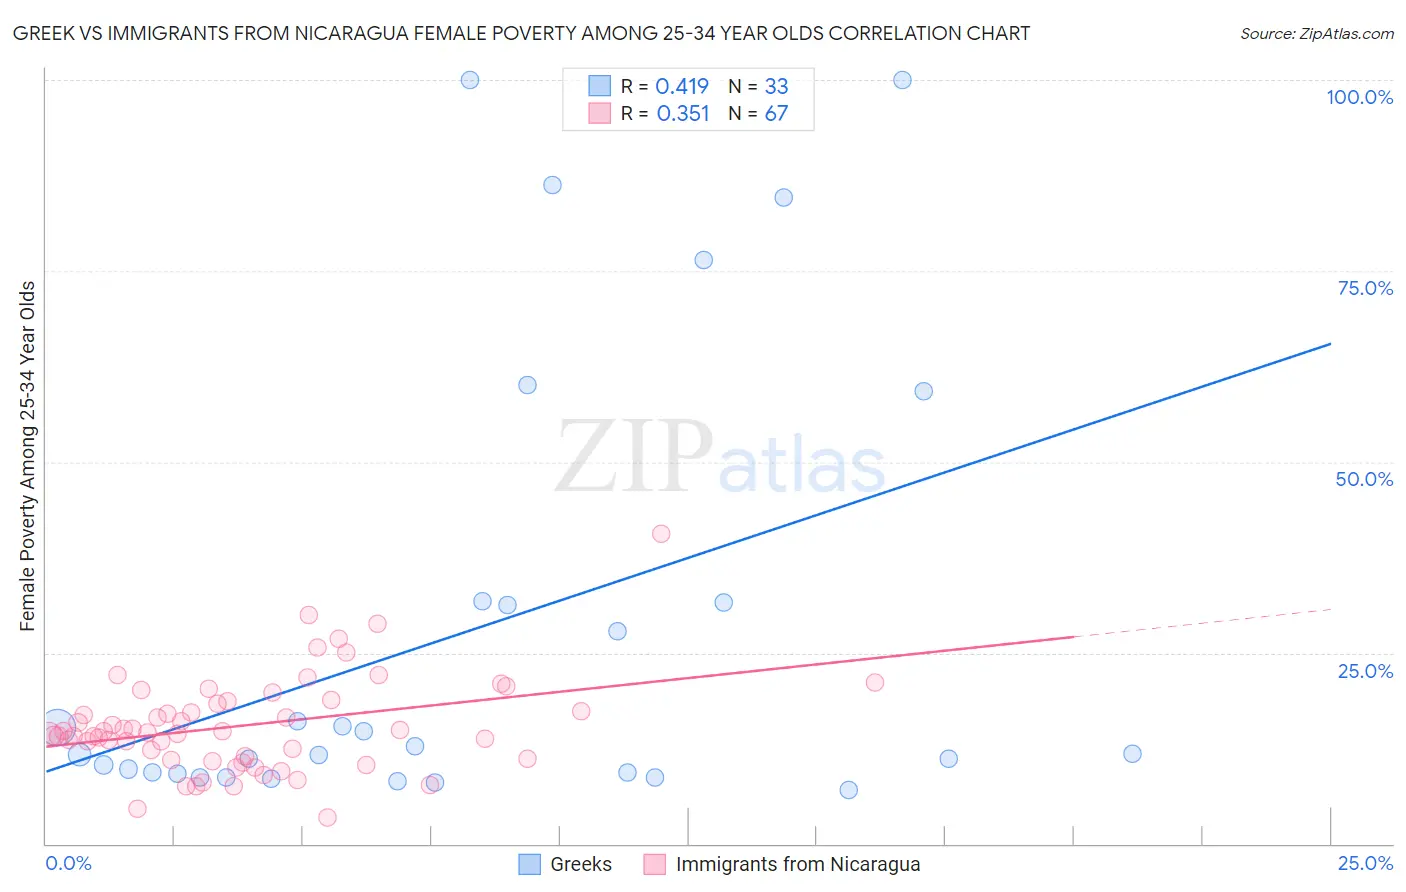 Greek vs Immigrants from Nicaragua Female Poverty Among 25-34 Year Olds